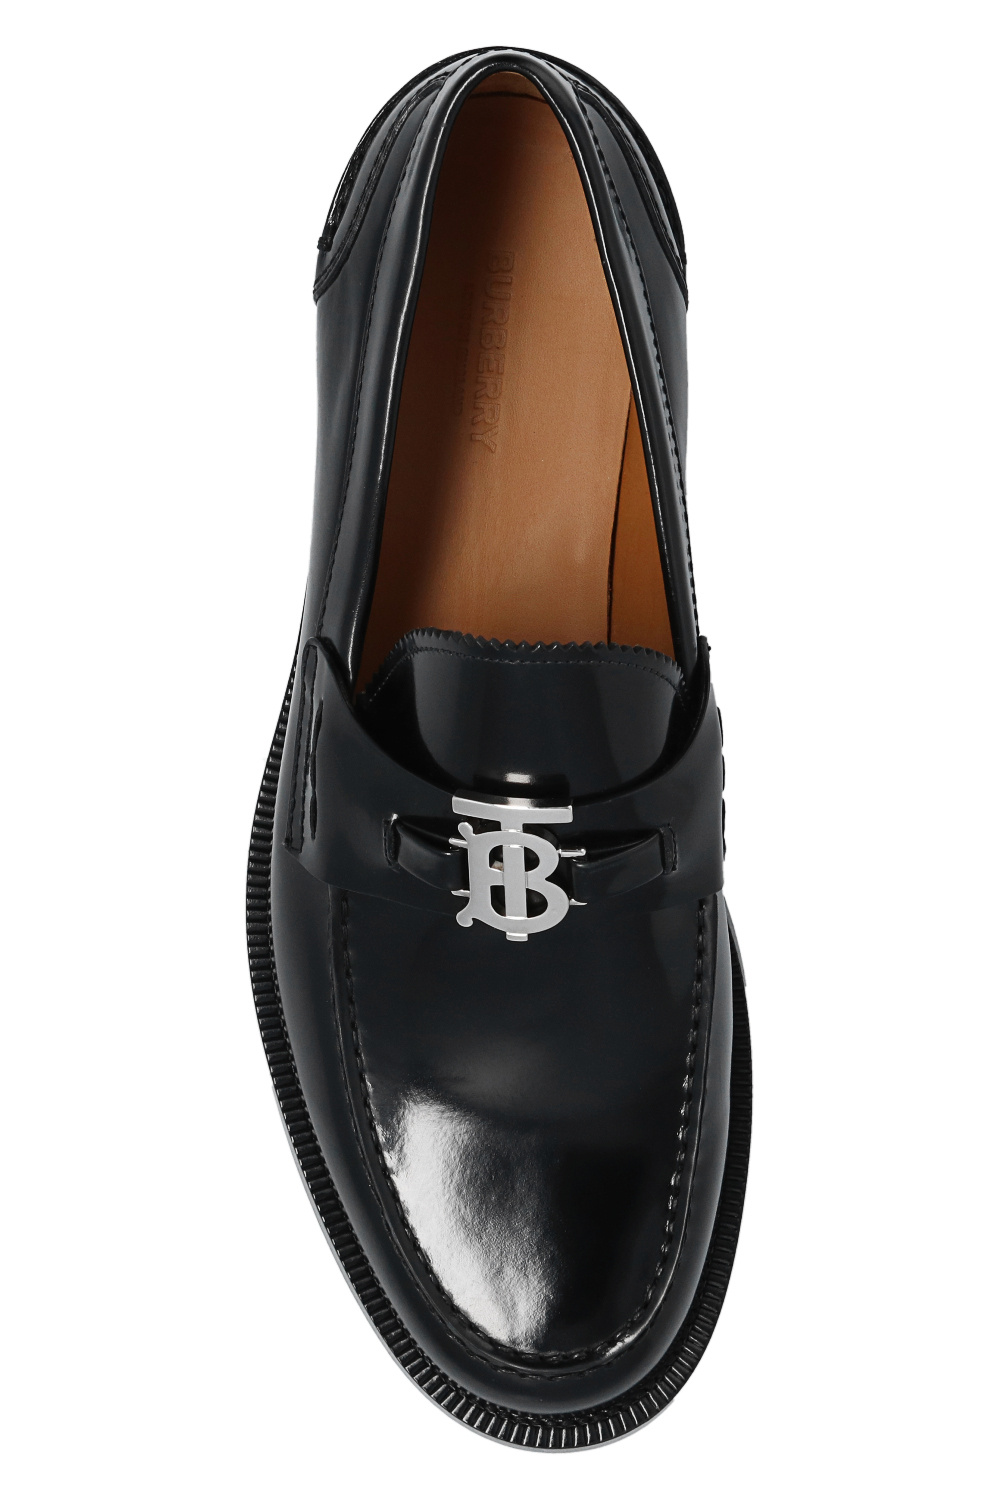 Burberry Leather loafers | Men's Shoes | Vitkac